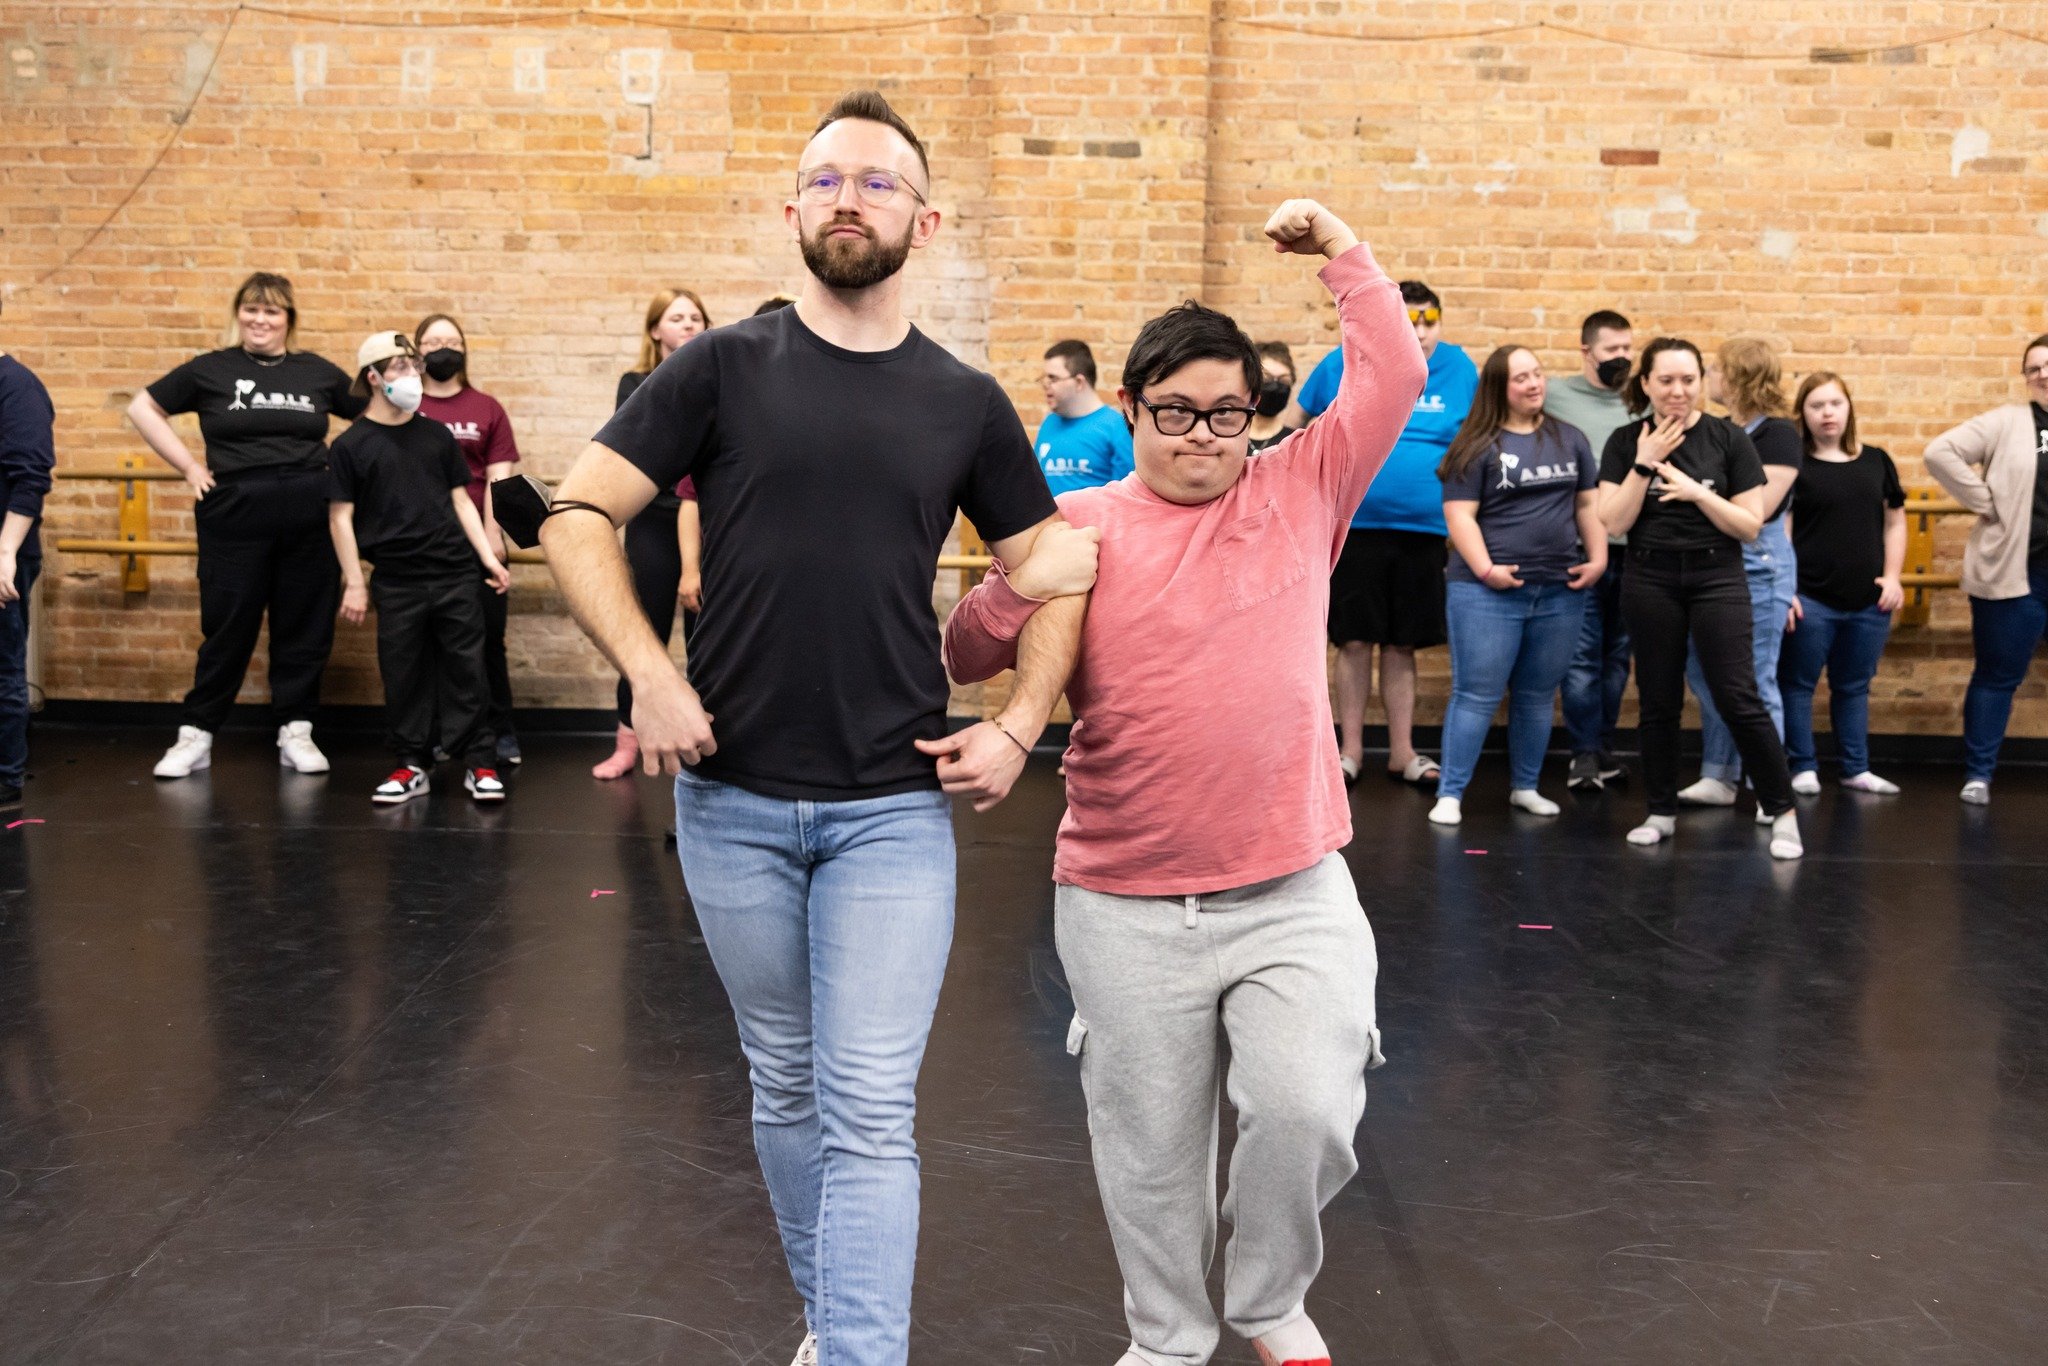 Heading into our final studio rehearsal like....
Our ensembles move into the theatre next week. Will we see you there? Grab tix for #OdysseyABLE at ableensemble.com/events
📸 Justin Barbin
.
.
.
[ID: Braden and Samuel link arms and confidently strut 